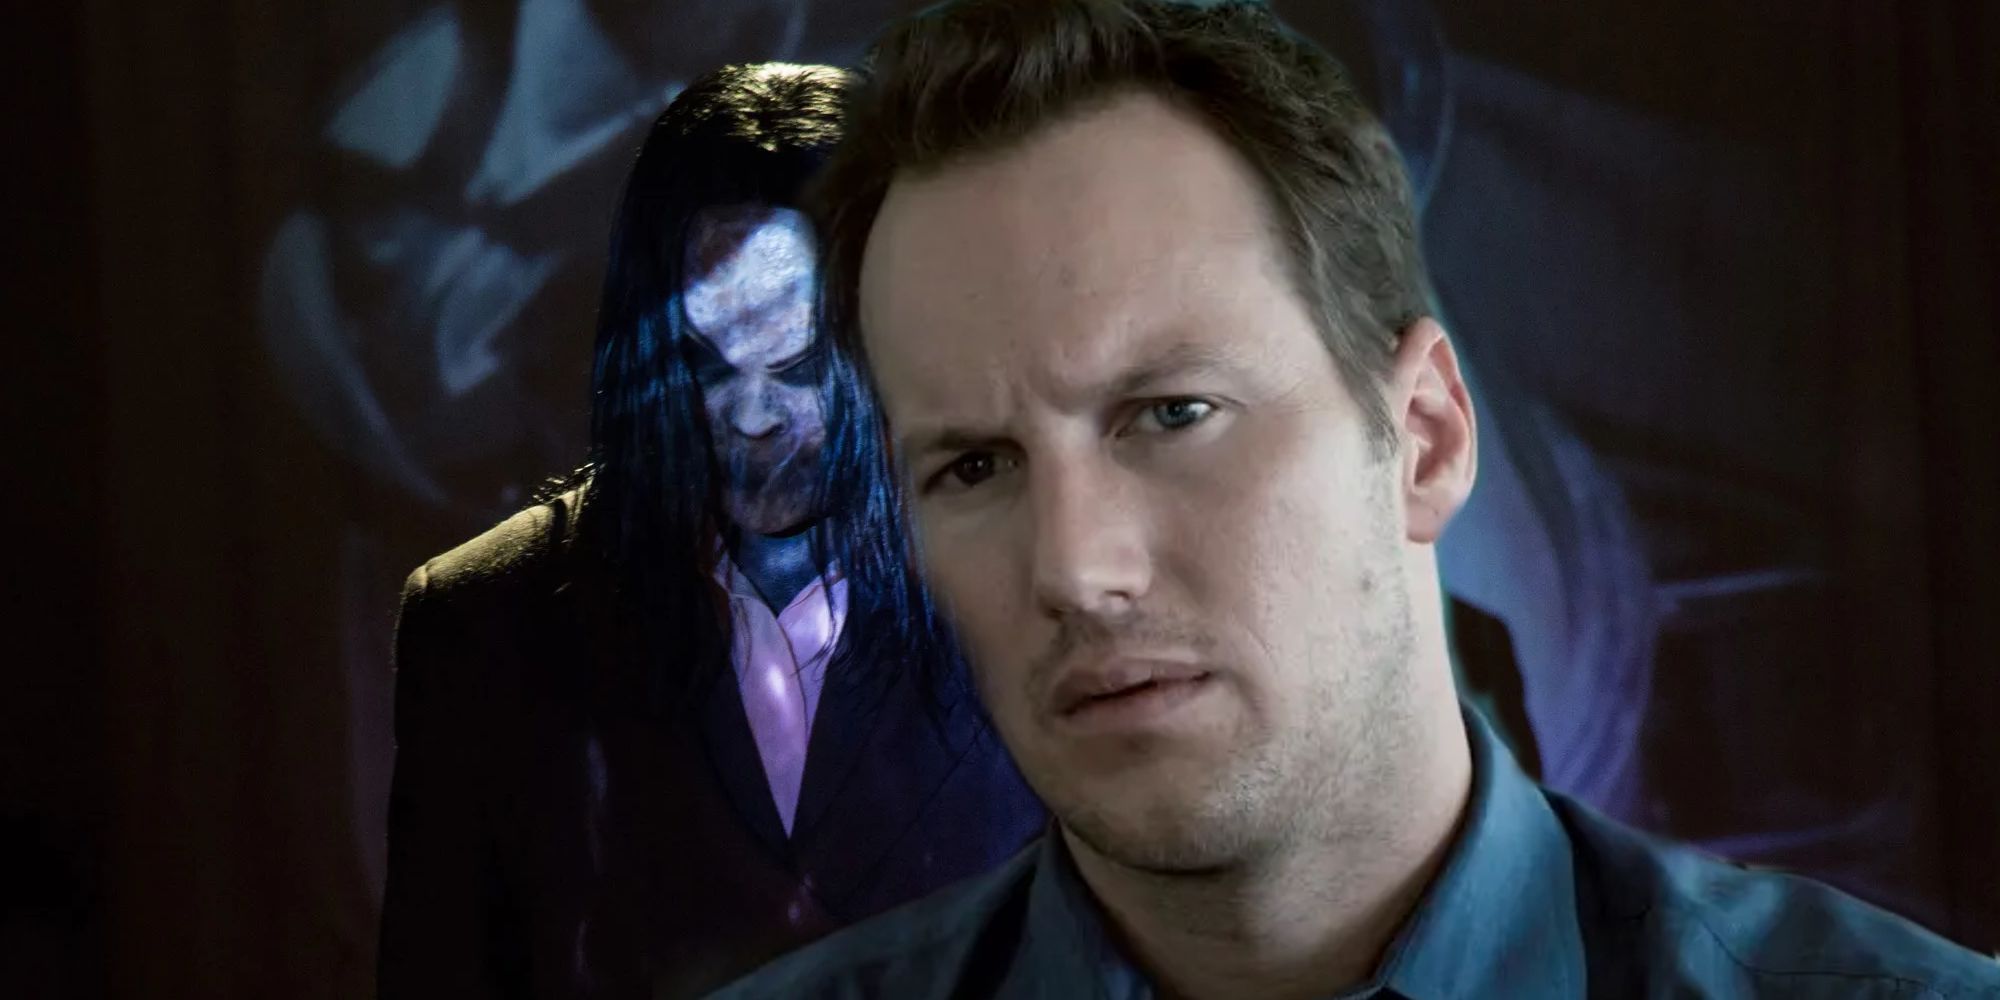 Potential Insidious & Sinister Crossover Gets Discouraging Update From Jason Blum